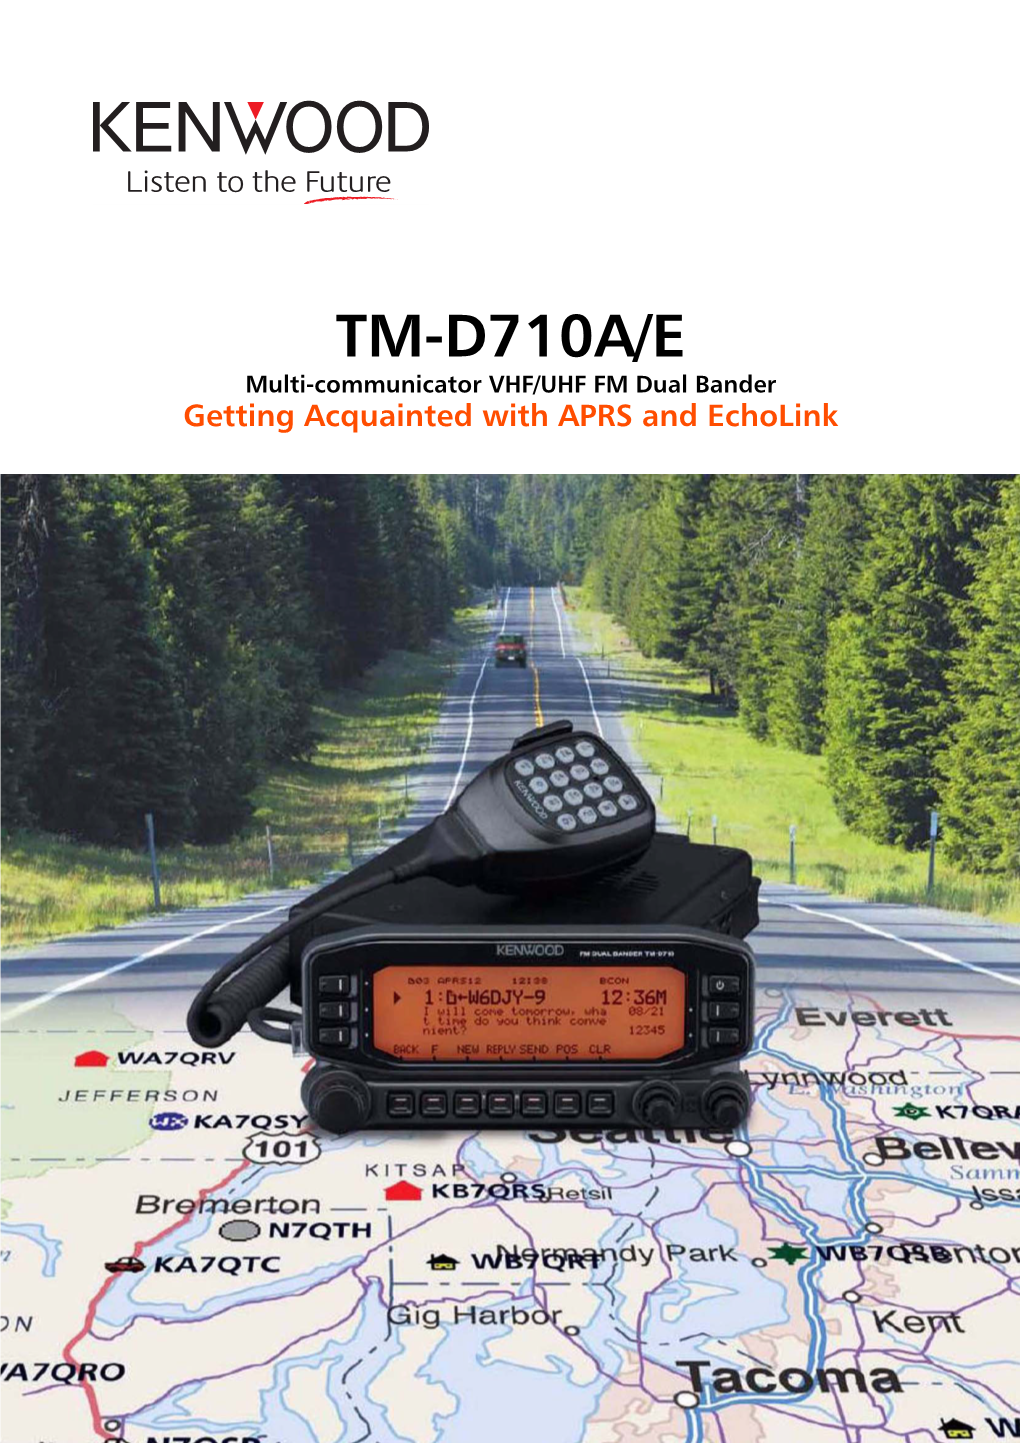 TM-D710A/E Multi-Communicator VHF/UHF FM Dual Bander Getting Acquainted with APRS and Echolink About This Manual